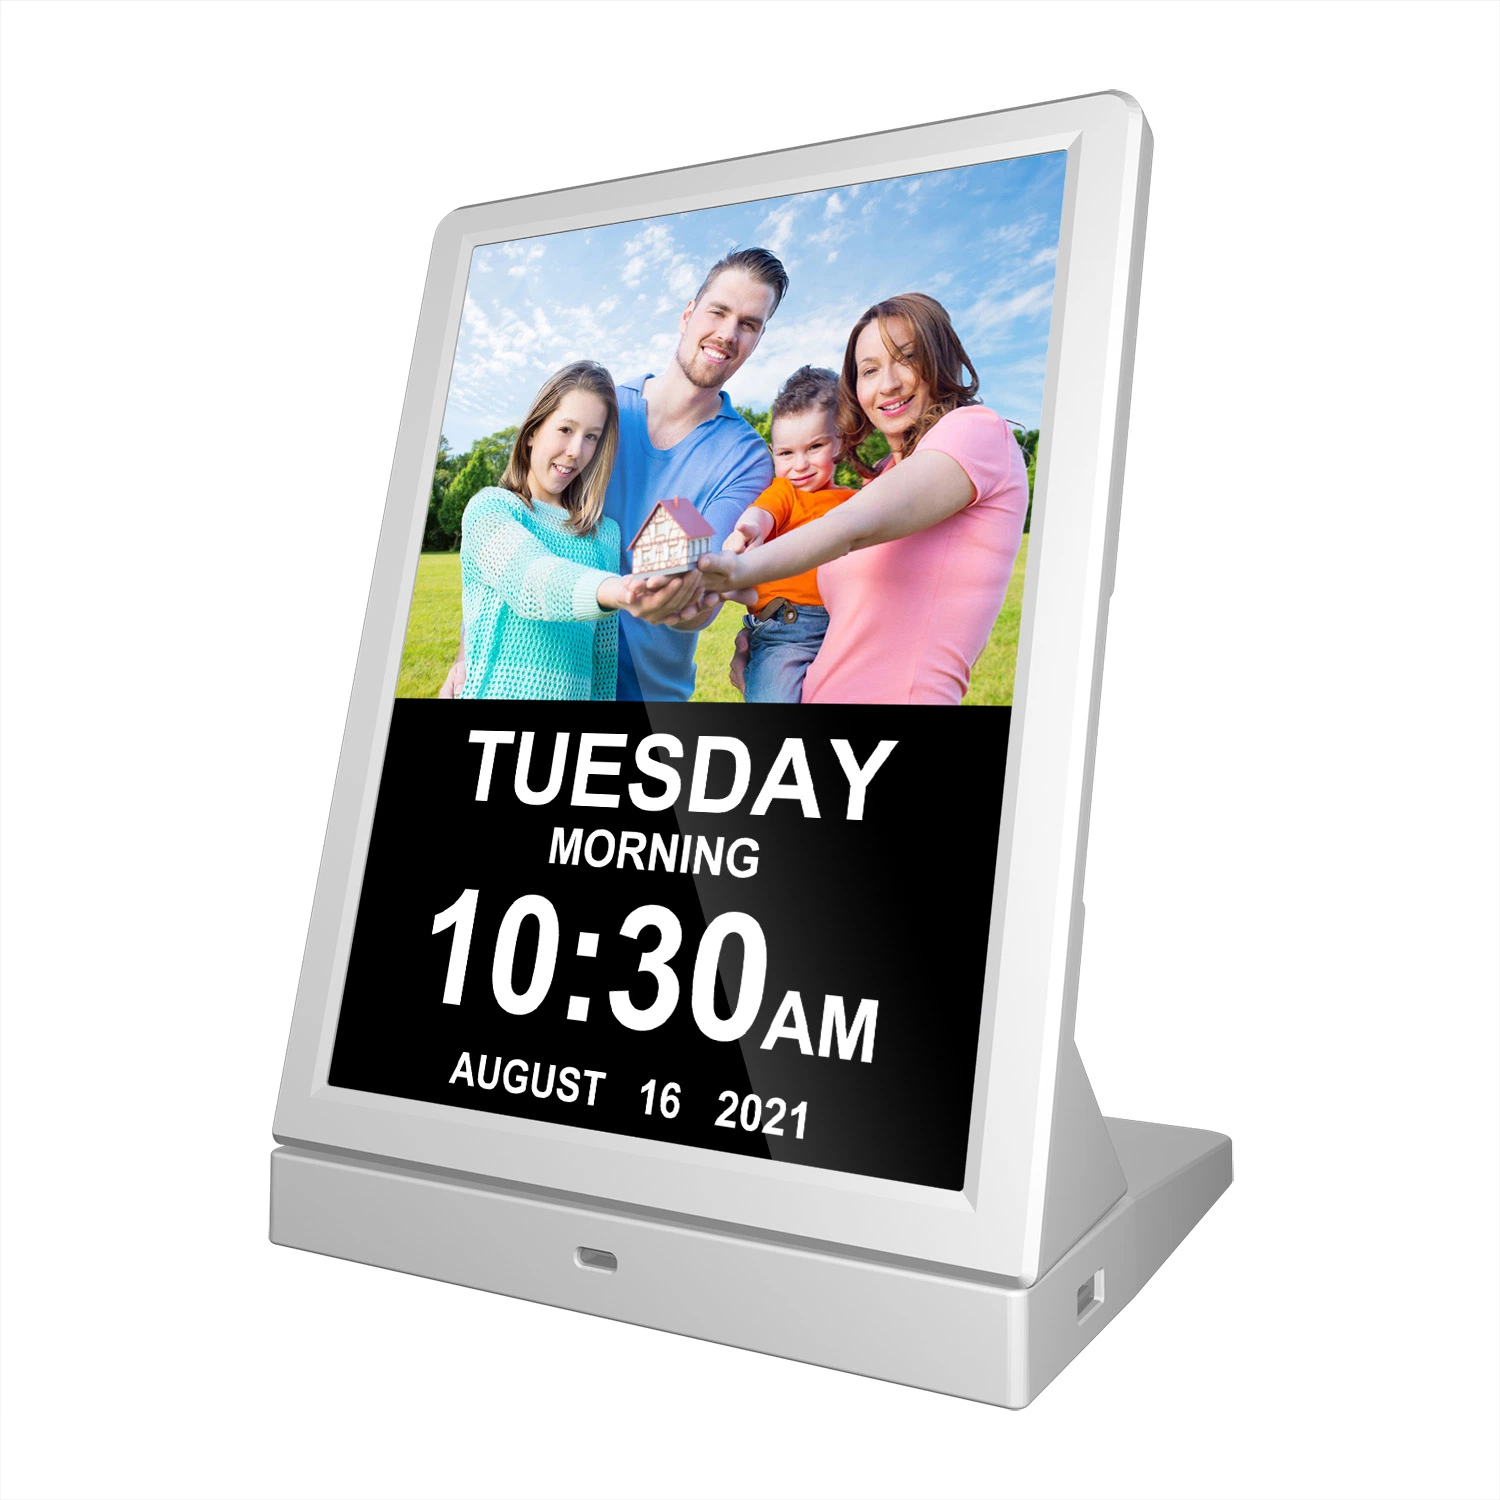 Cloud Server New Battery Operated Wireless Charger WiFi Digital Photo Frame